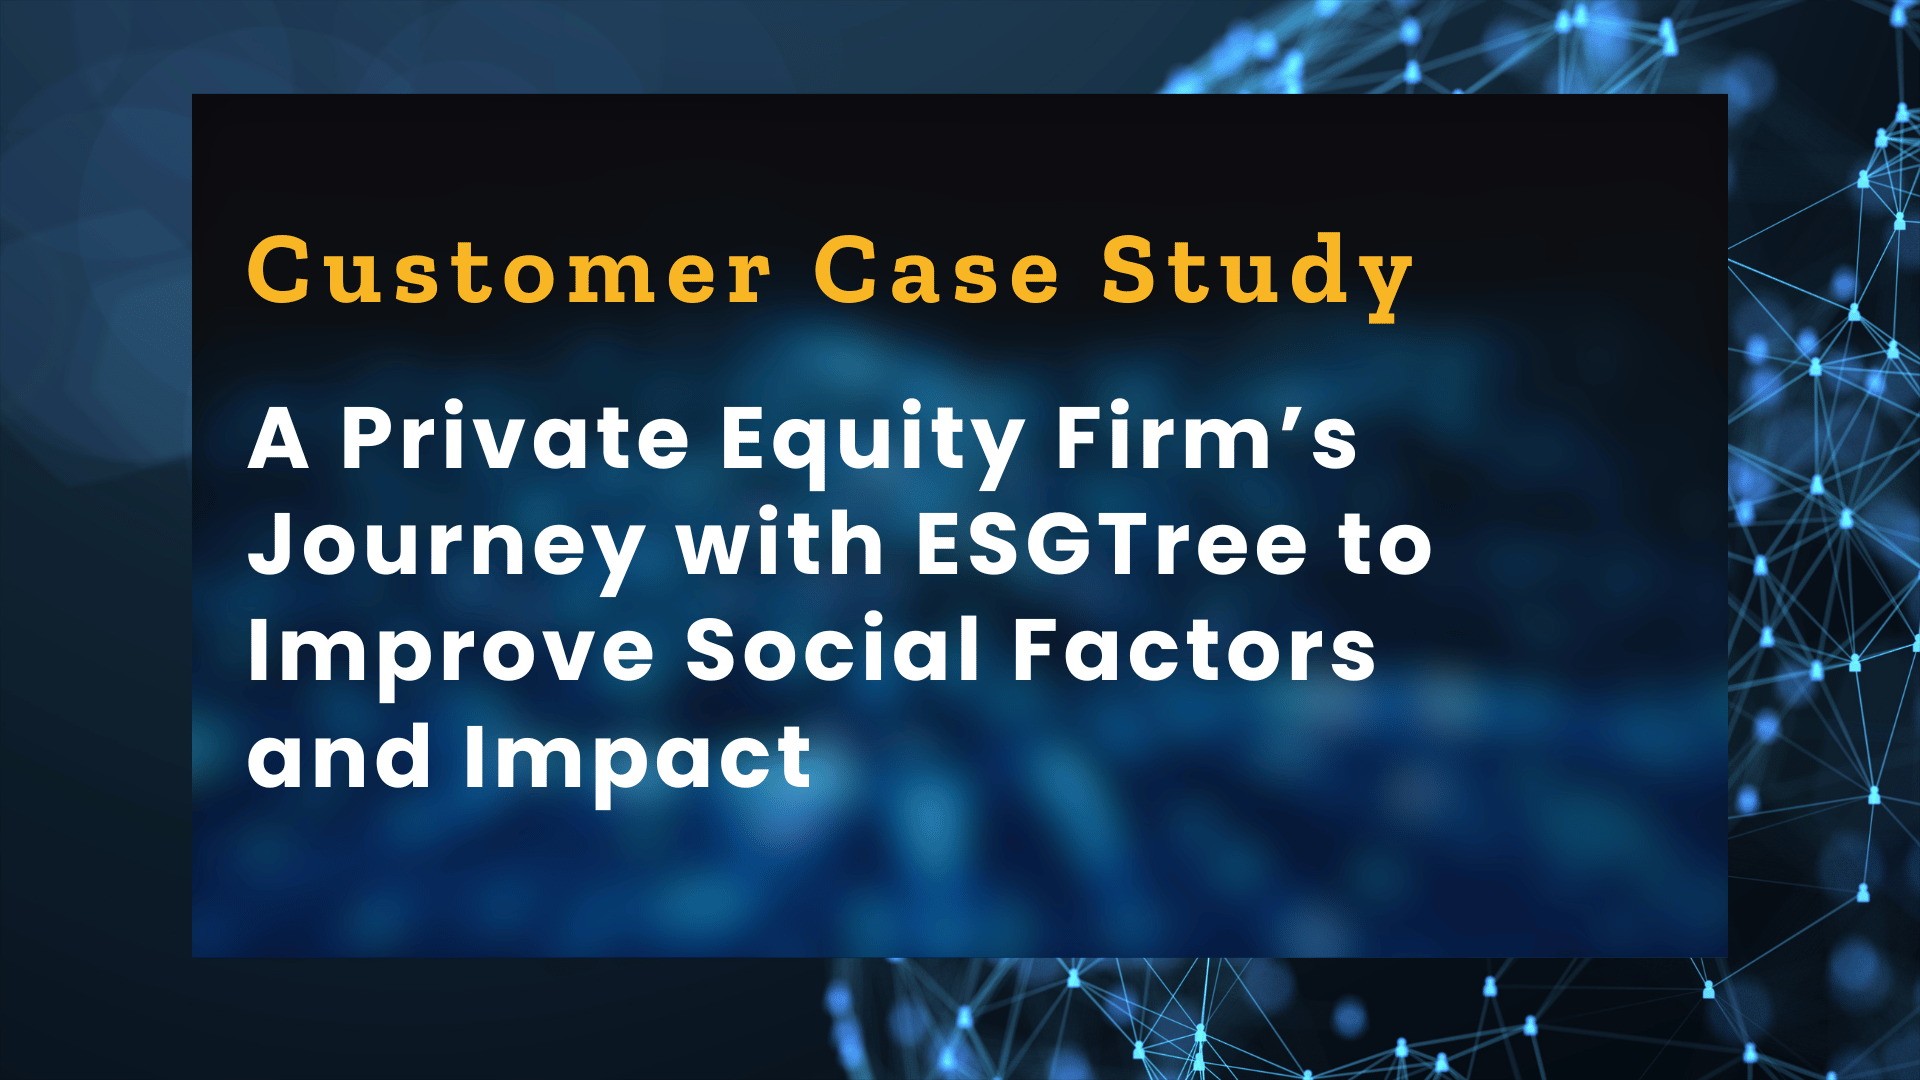 A Private Equity Firm’s journey with ESGTree to improve Social Factors and Impact